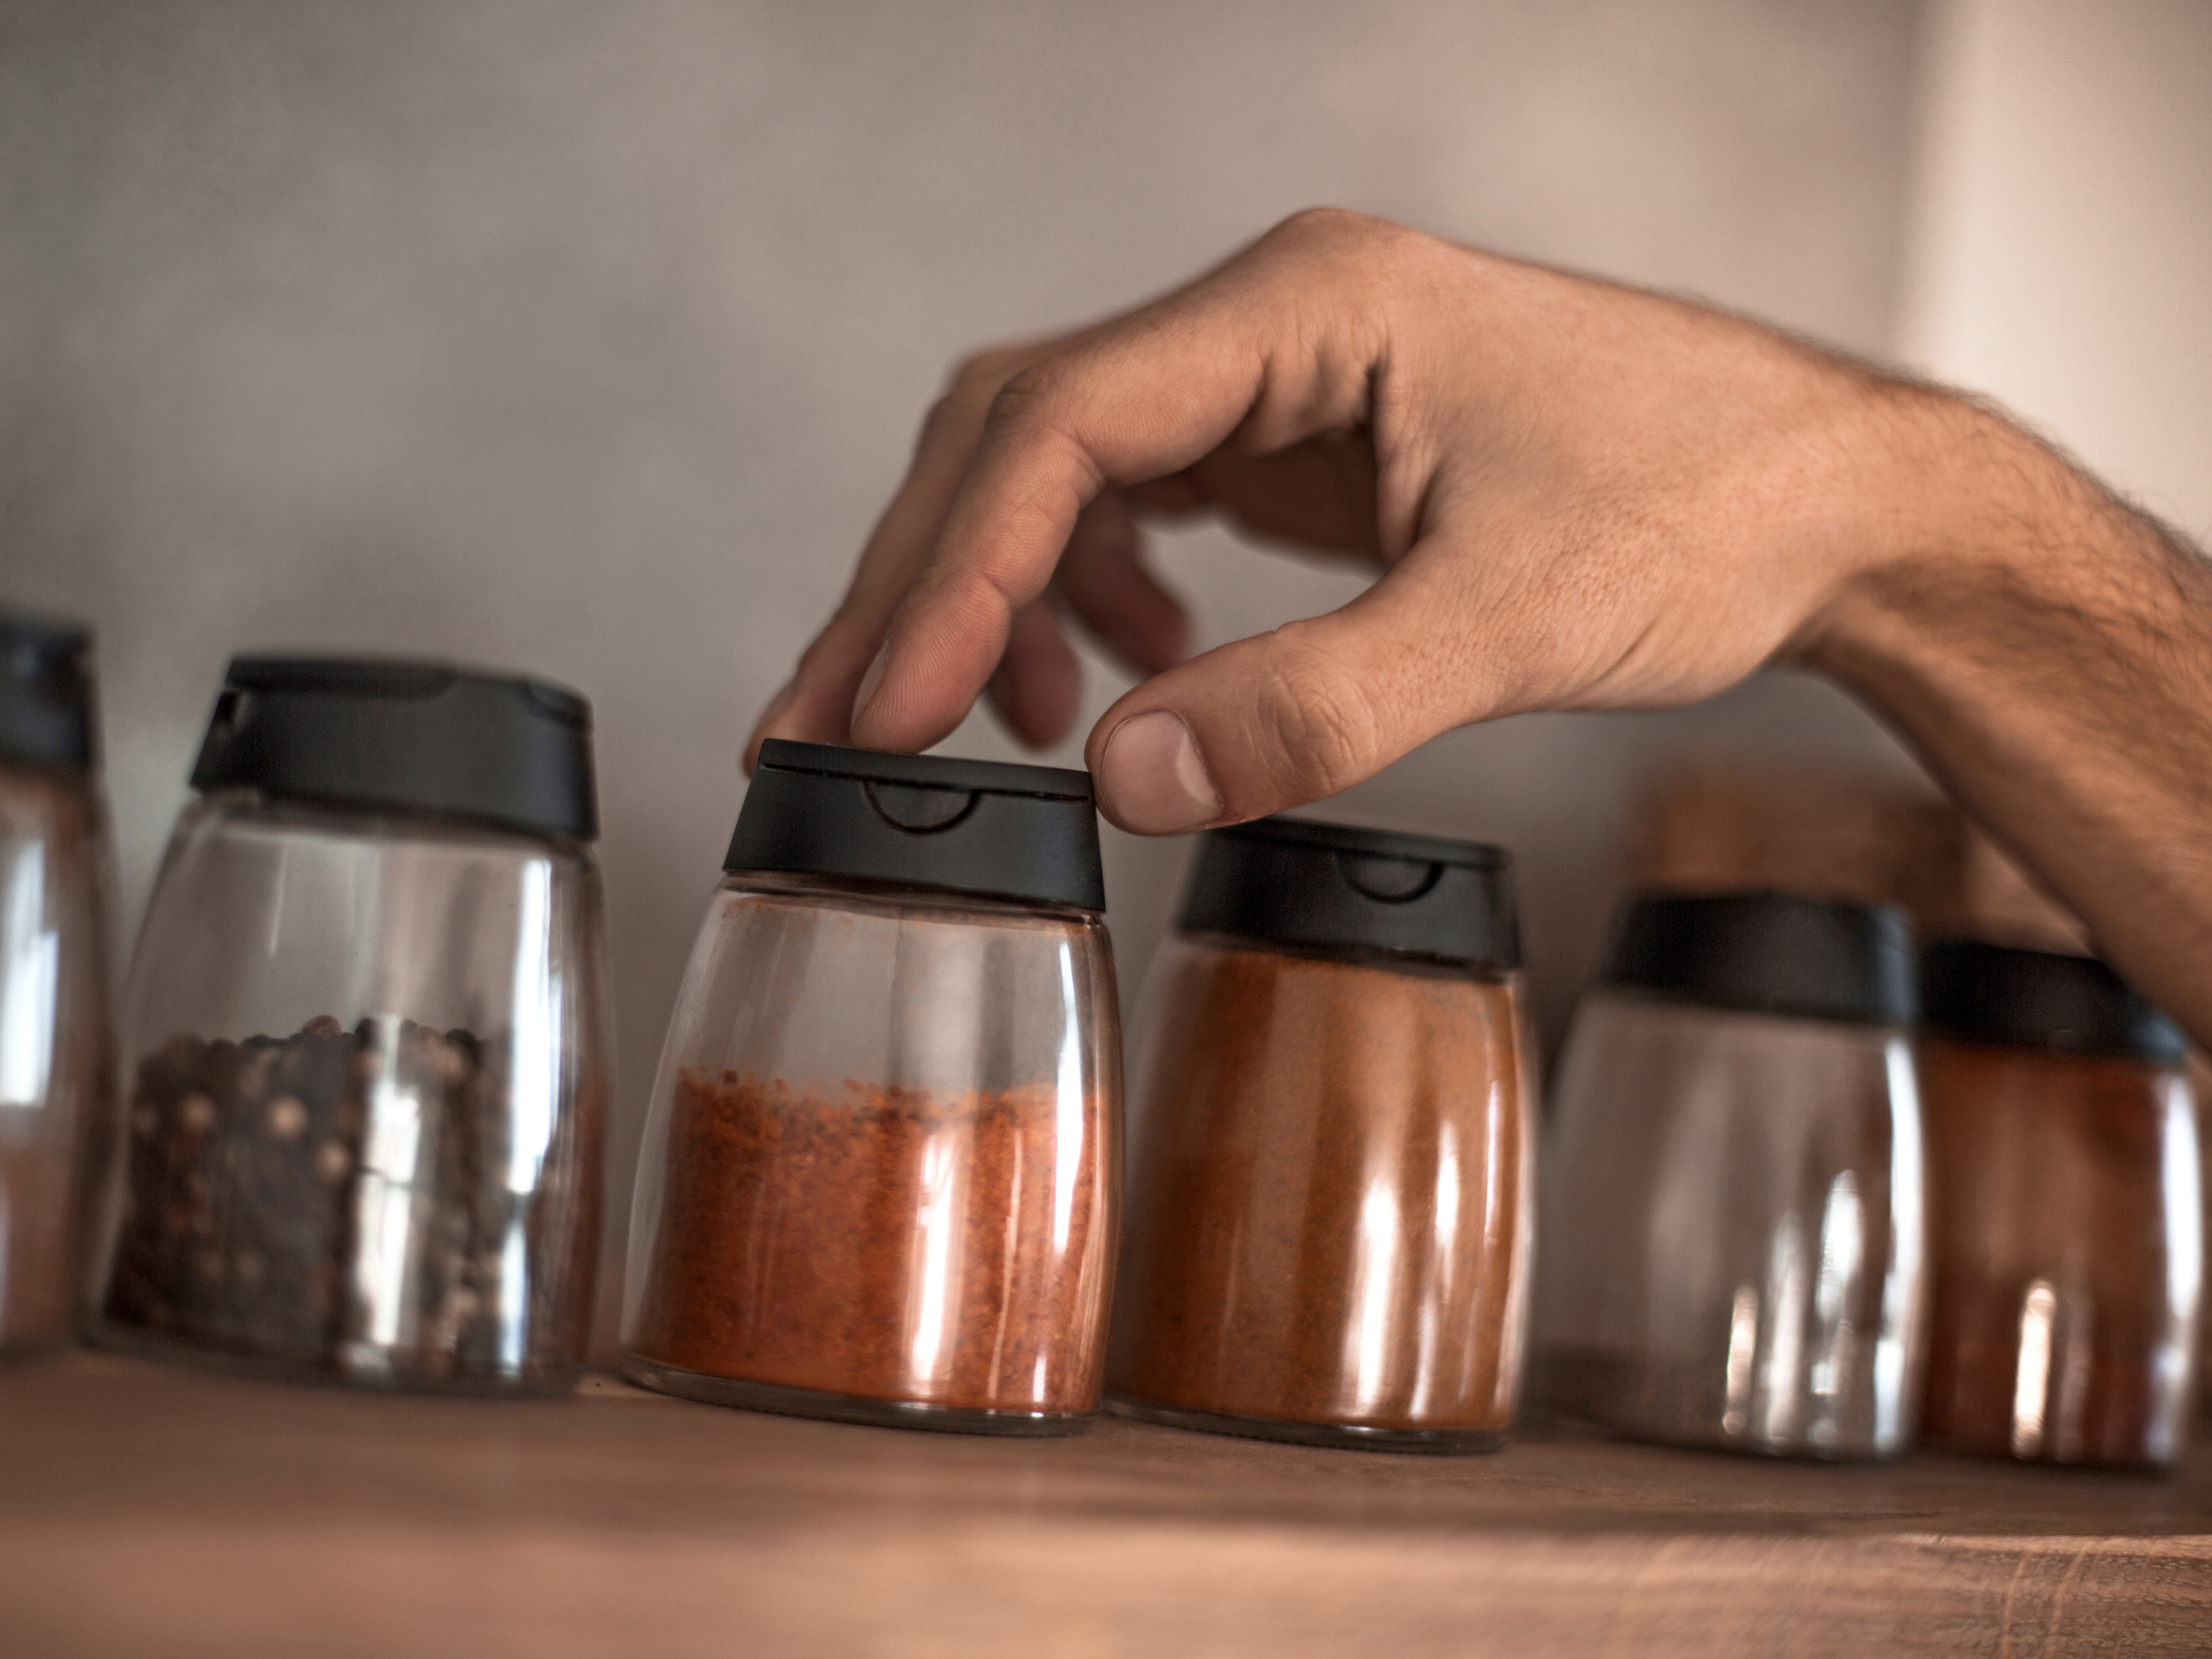 Spice Containers Pose Contamination Risk During Food Preparation